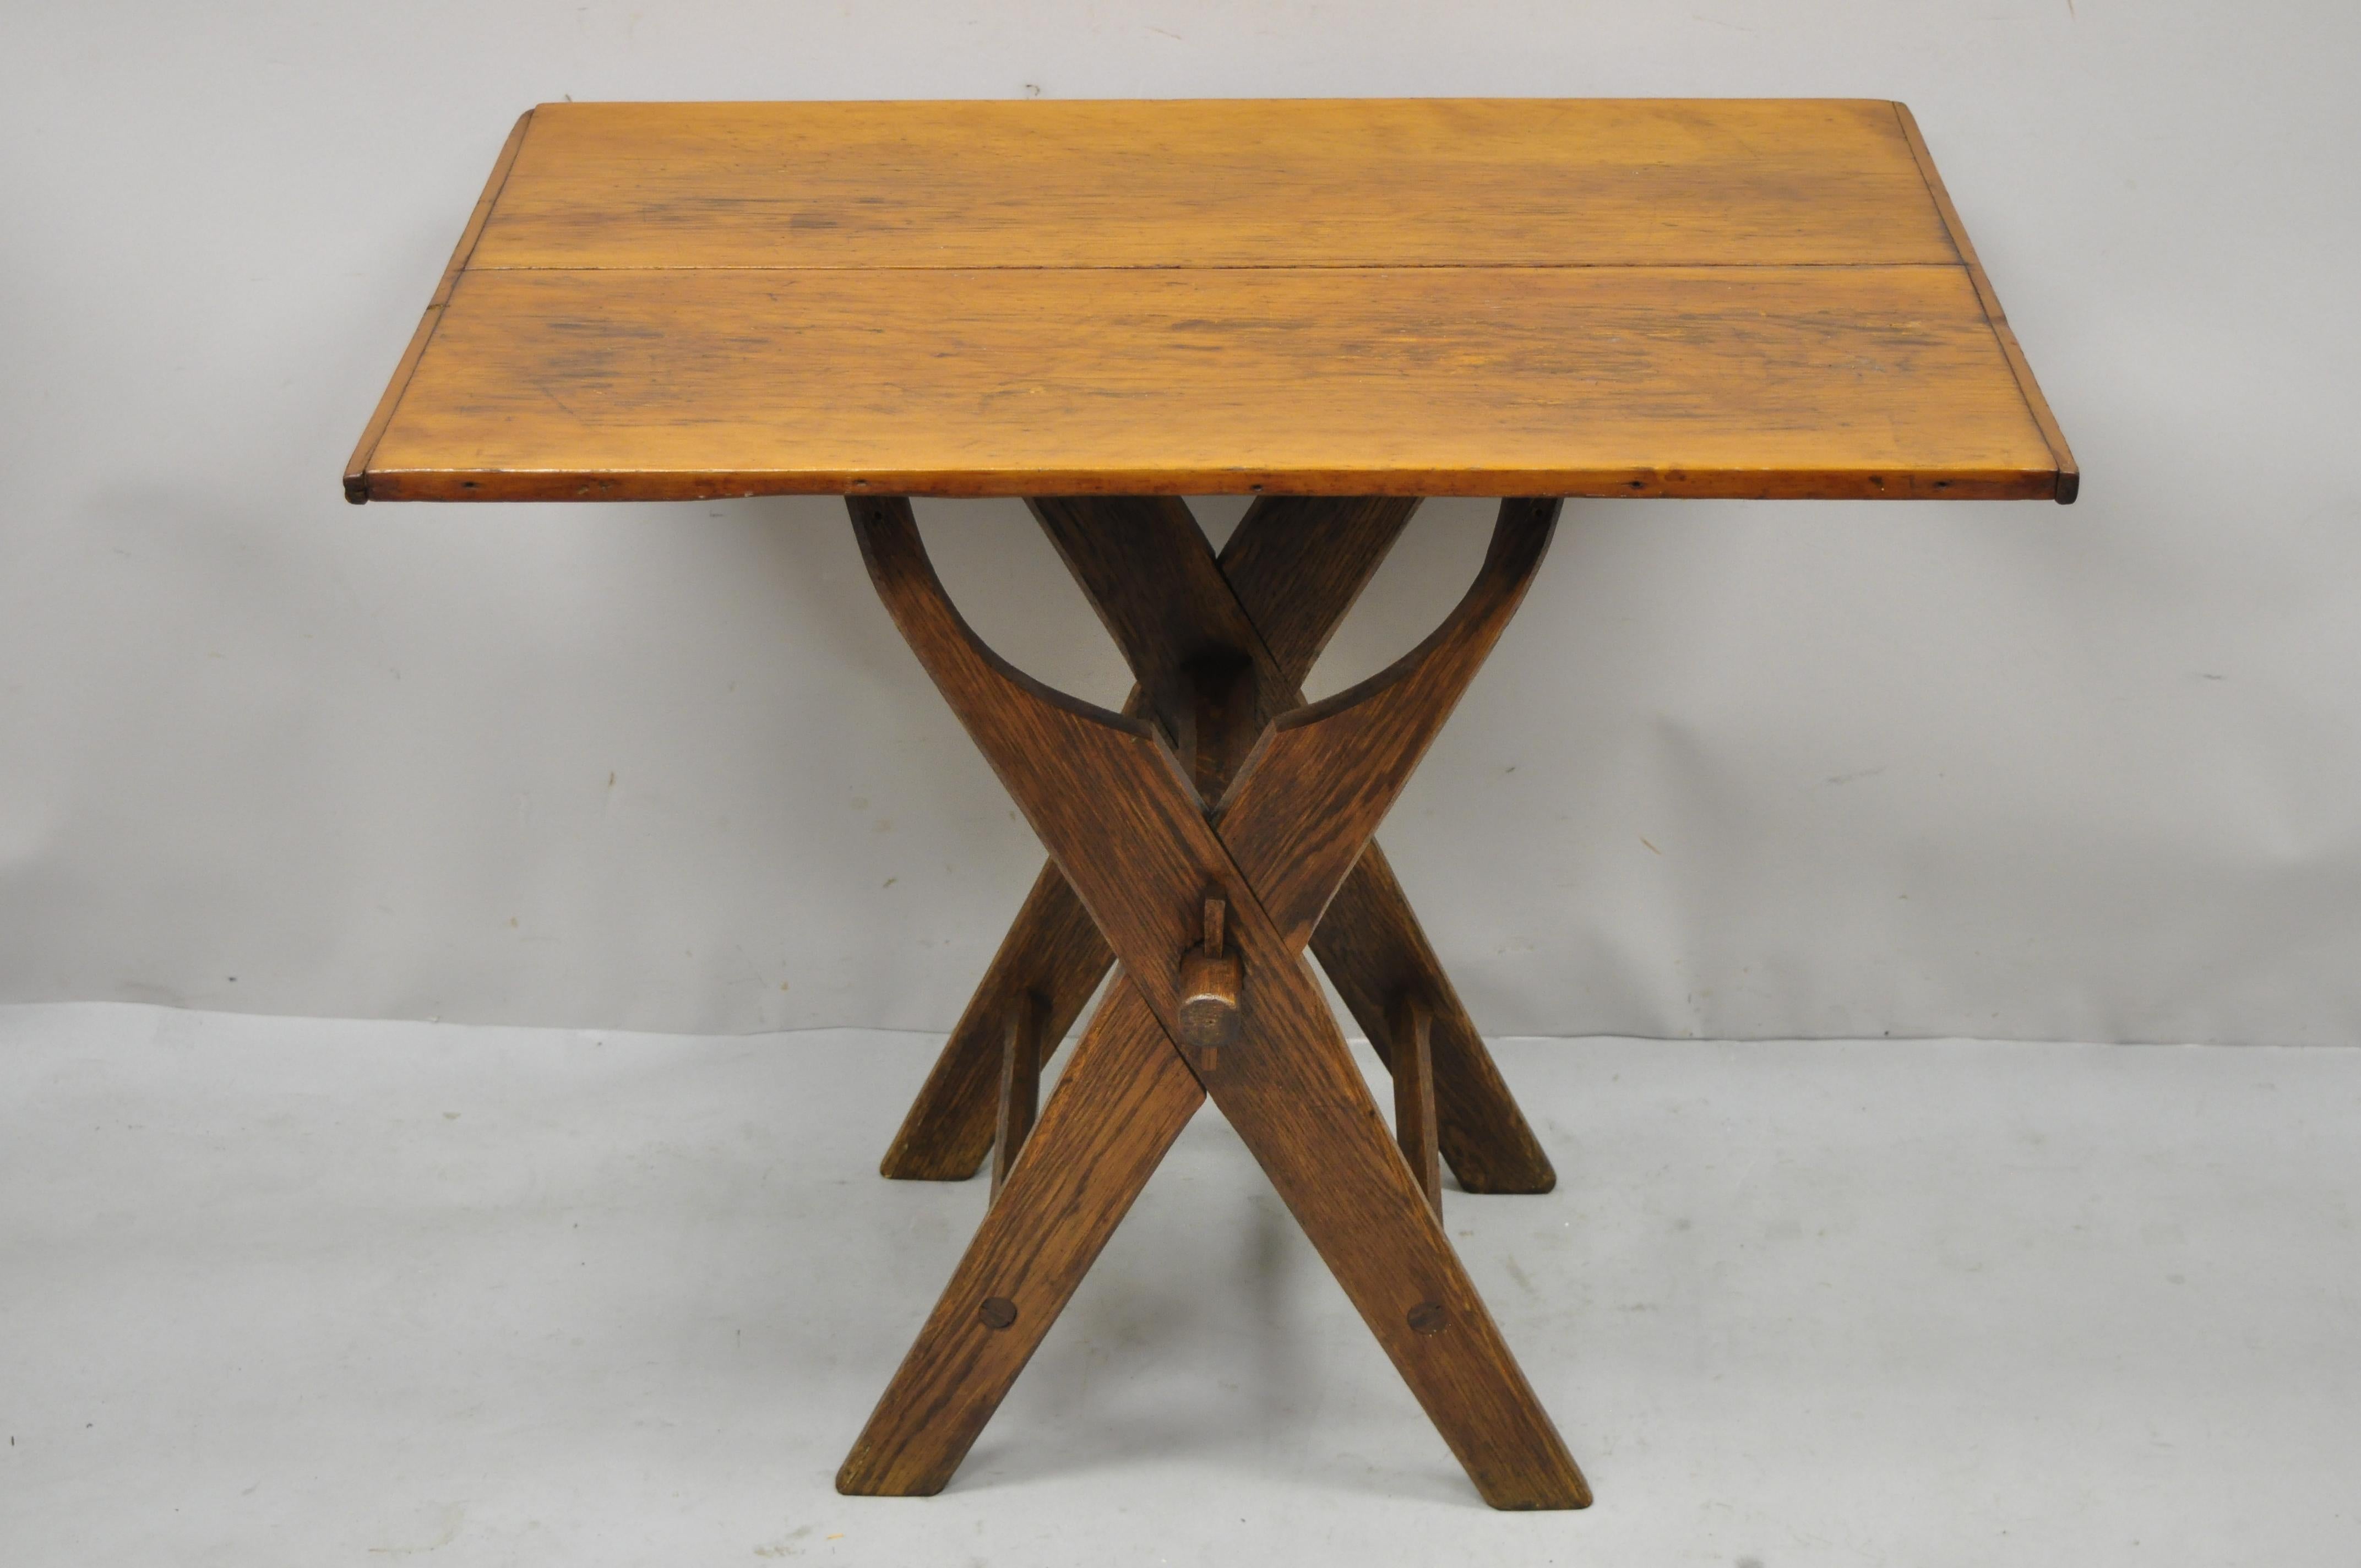 Antique French orovincial cherry & oak wood x-frame scissor work table. Item features cross stretcher x-frame base with exposed joinery, solid wood construction, beautiful wood grain, tapered legs, very nice antique item, quality French